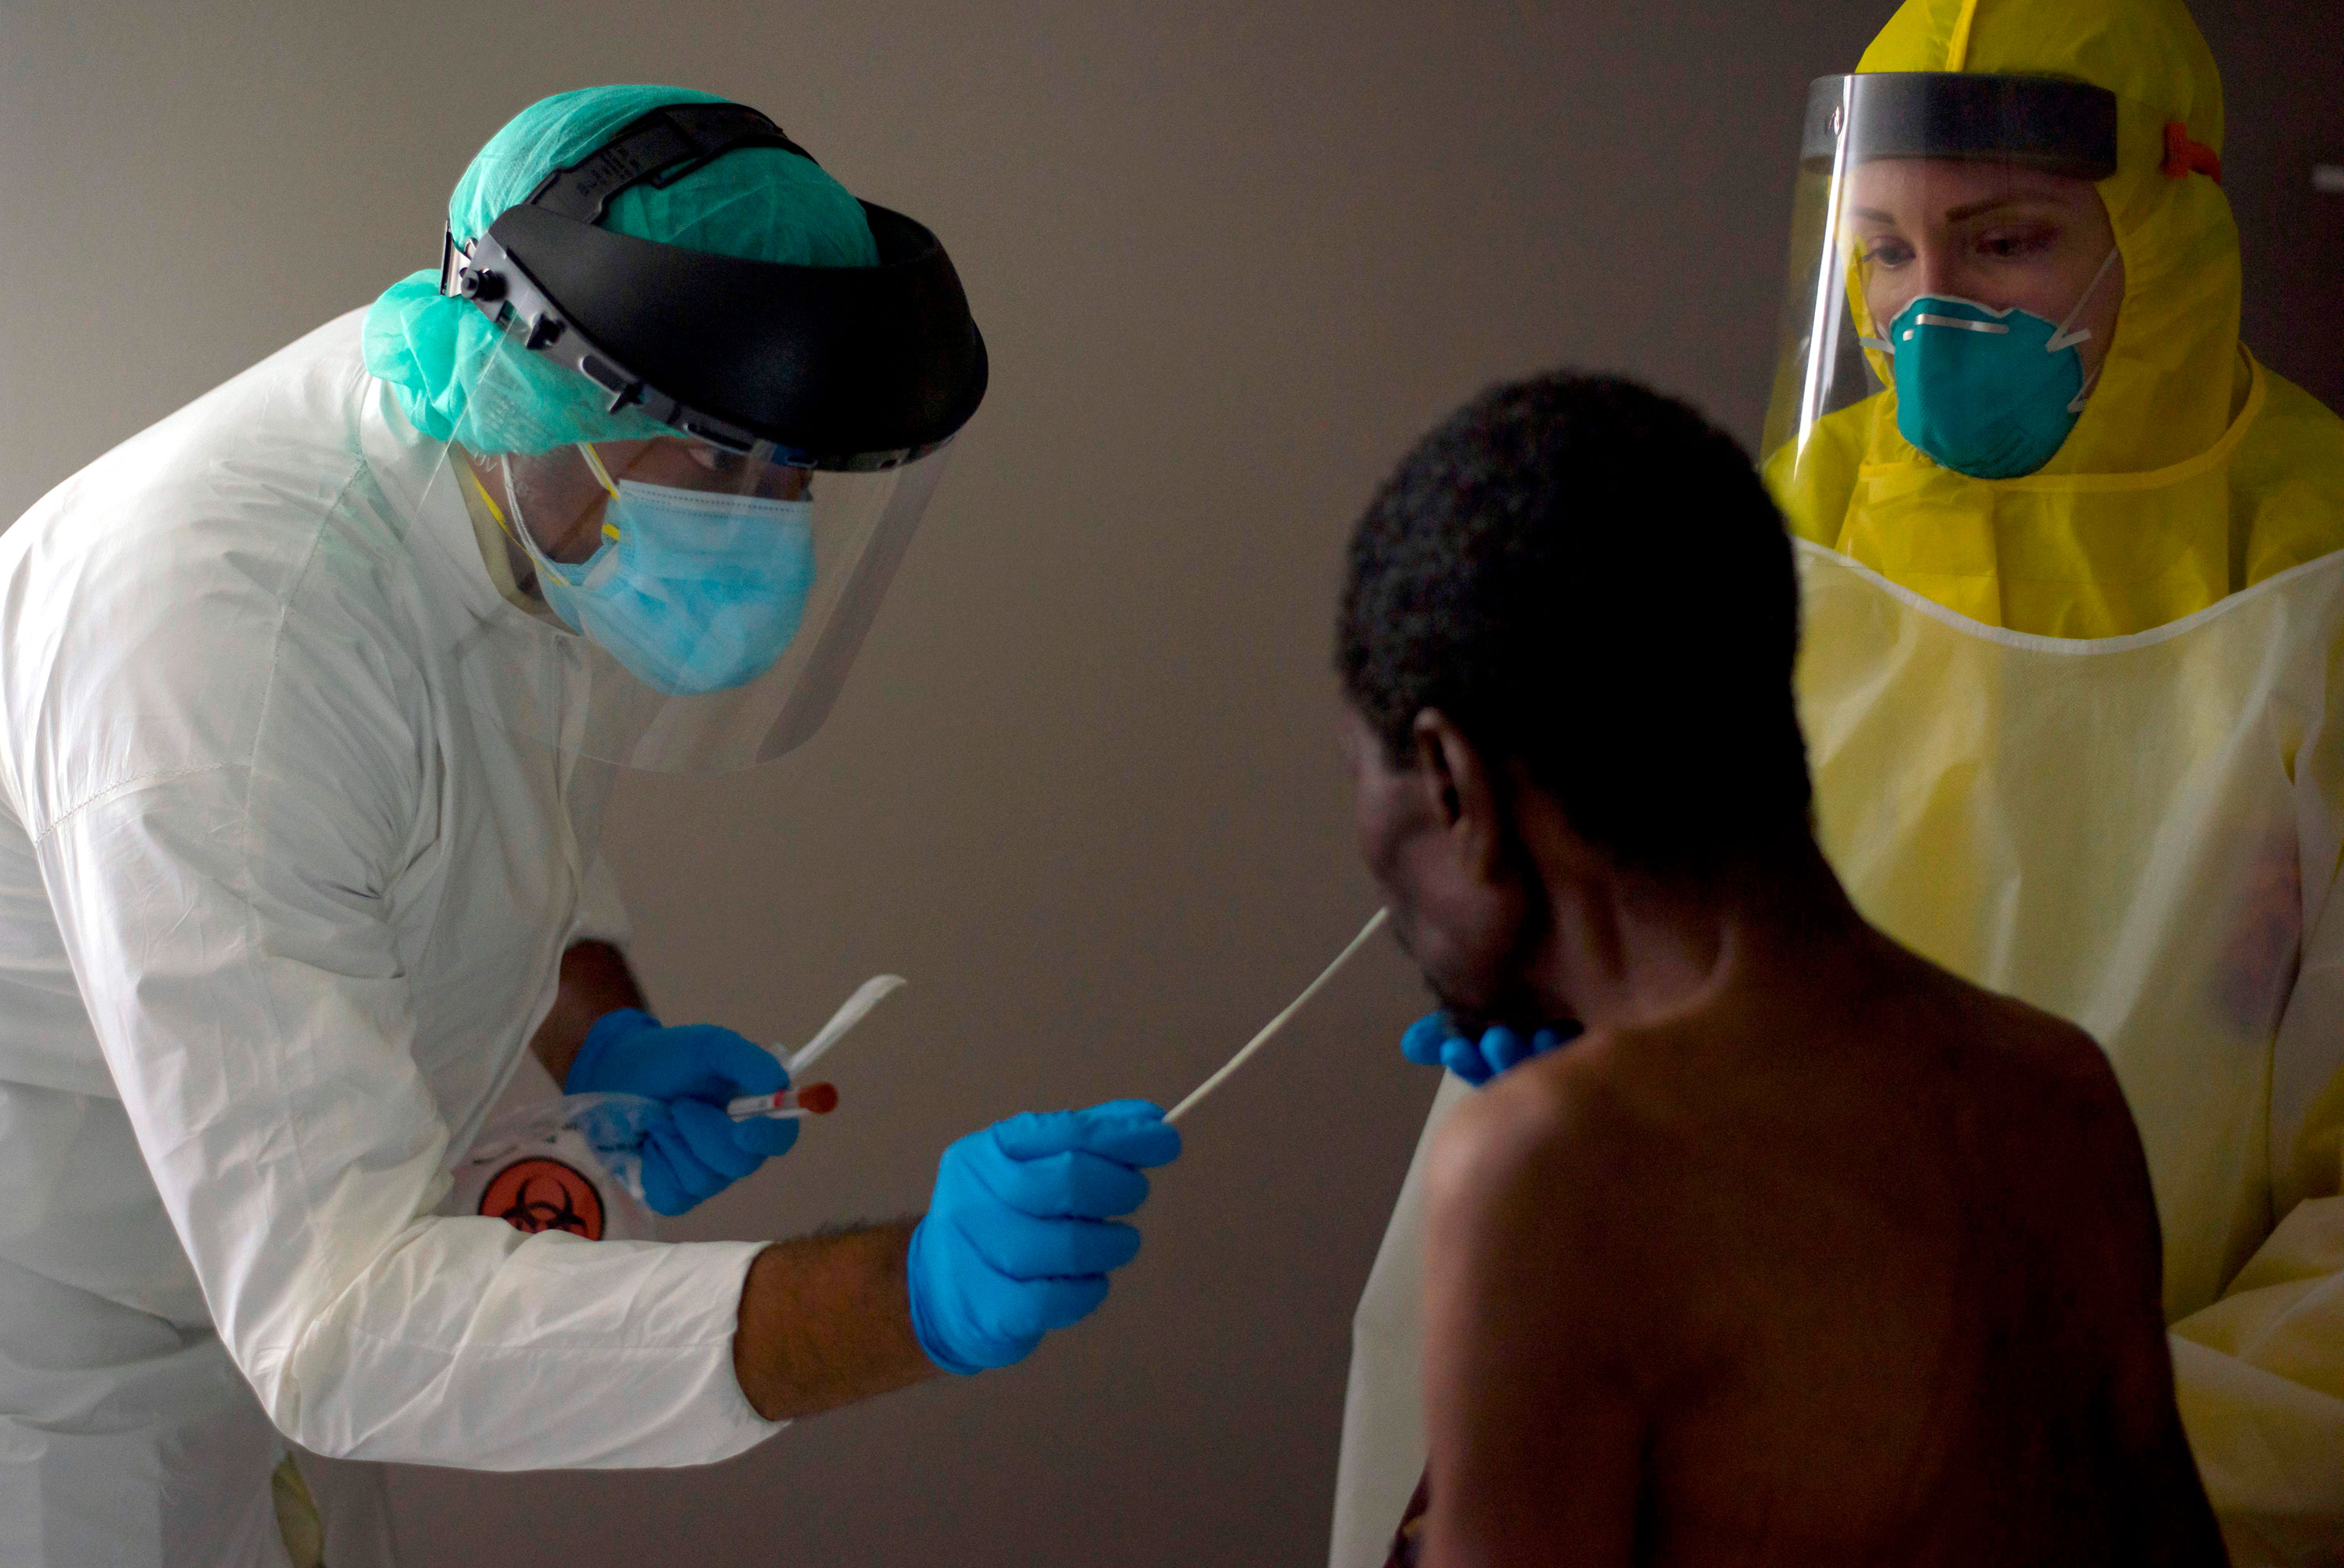 A healthcare worker conducts a coronavirus test at United Memorial Medical Center in Houston, Texas, on July 2.